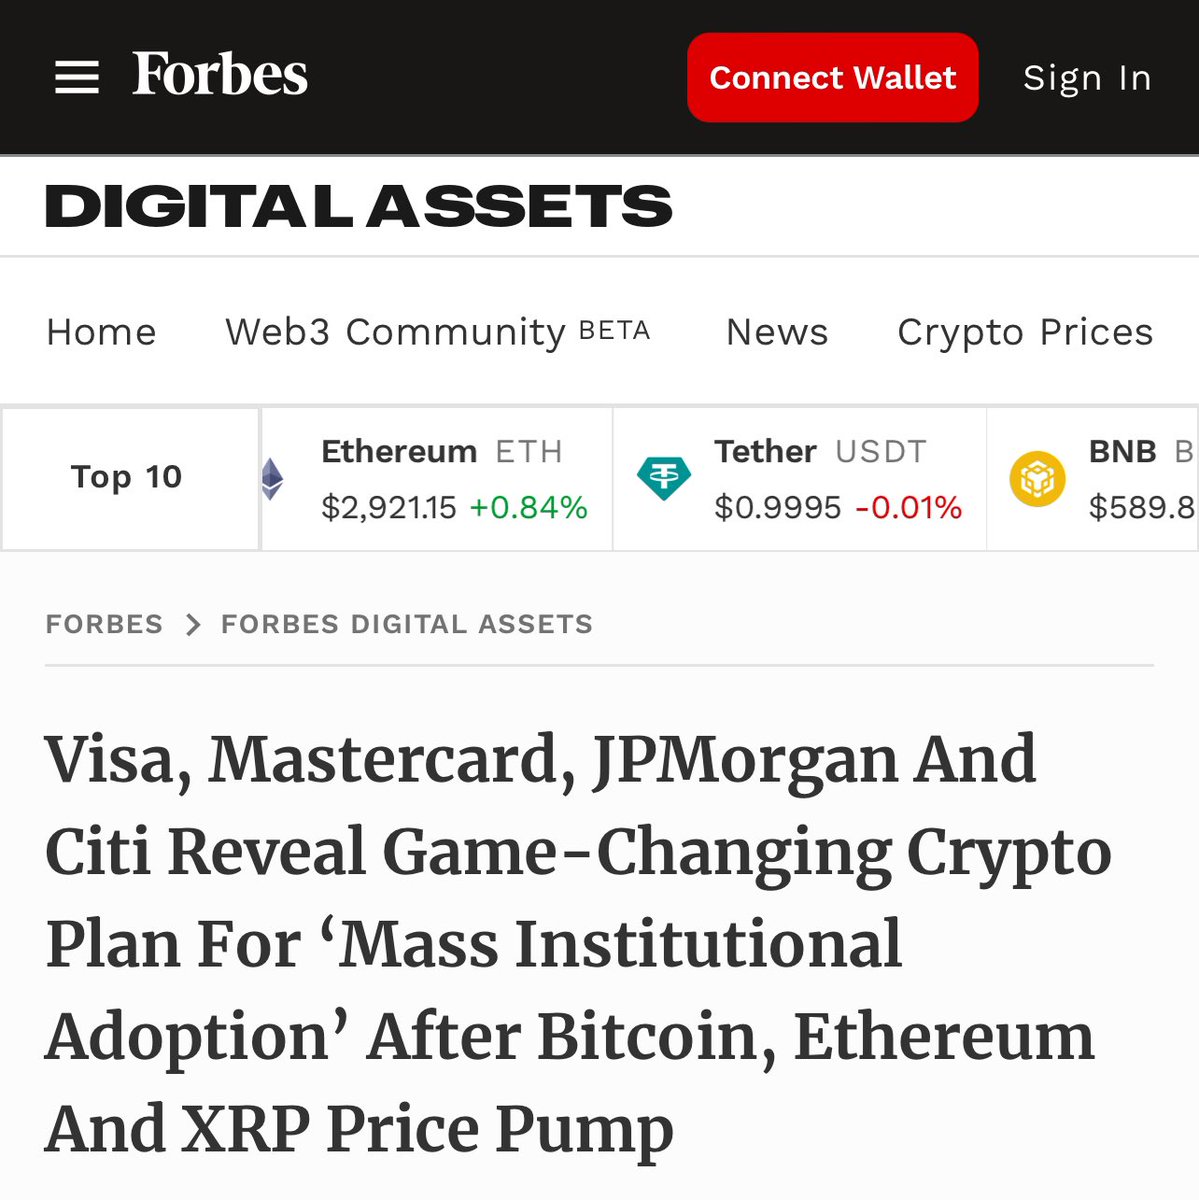 🚨 Visa, Mastercard, JPMorgan And Citi Reveal Game-Changing Crypto Plan For ‘Mass Institutional Adoption’ #XRP looks like the winner! WITH XRPL Capable of running enough transactions to meet the needs!

There will be huge volumes on XRPL defi in the coming weeks and month,